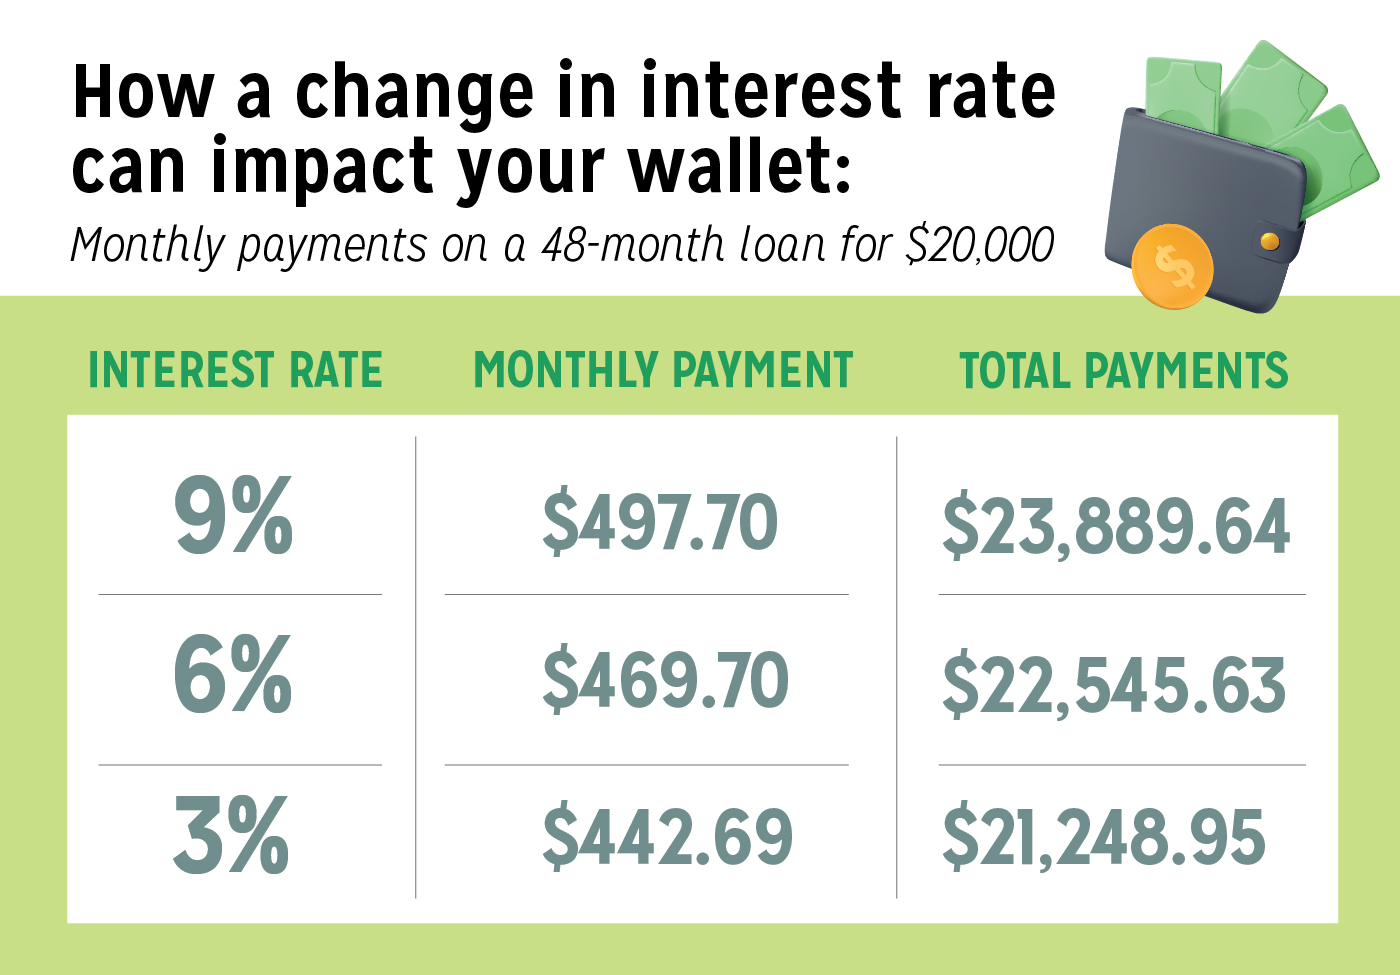 Infographic with information about interest rates impacting your wallet